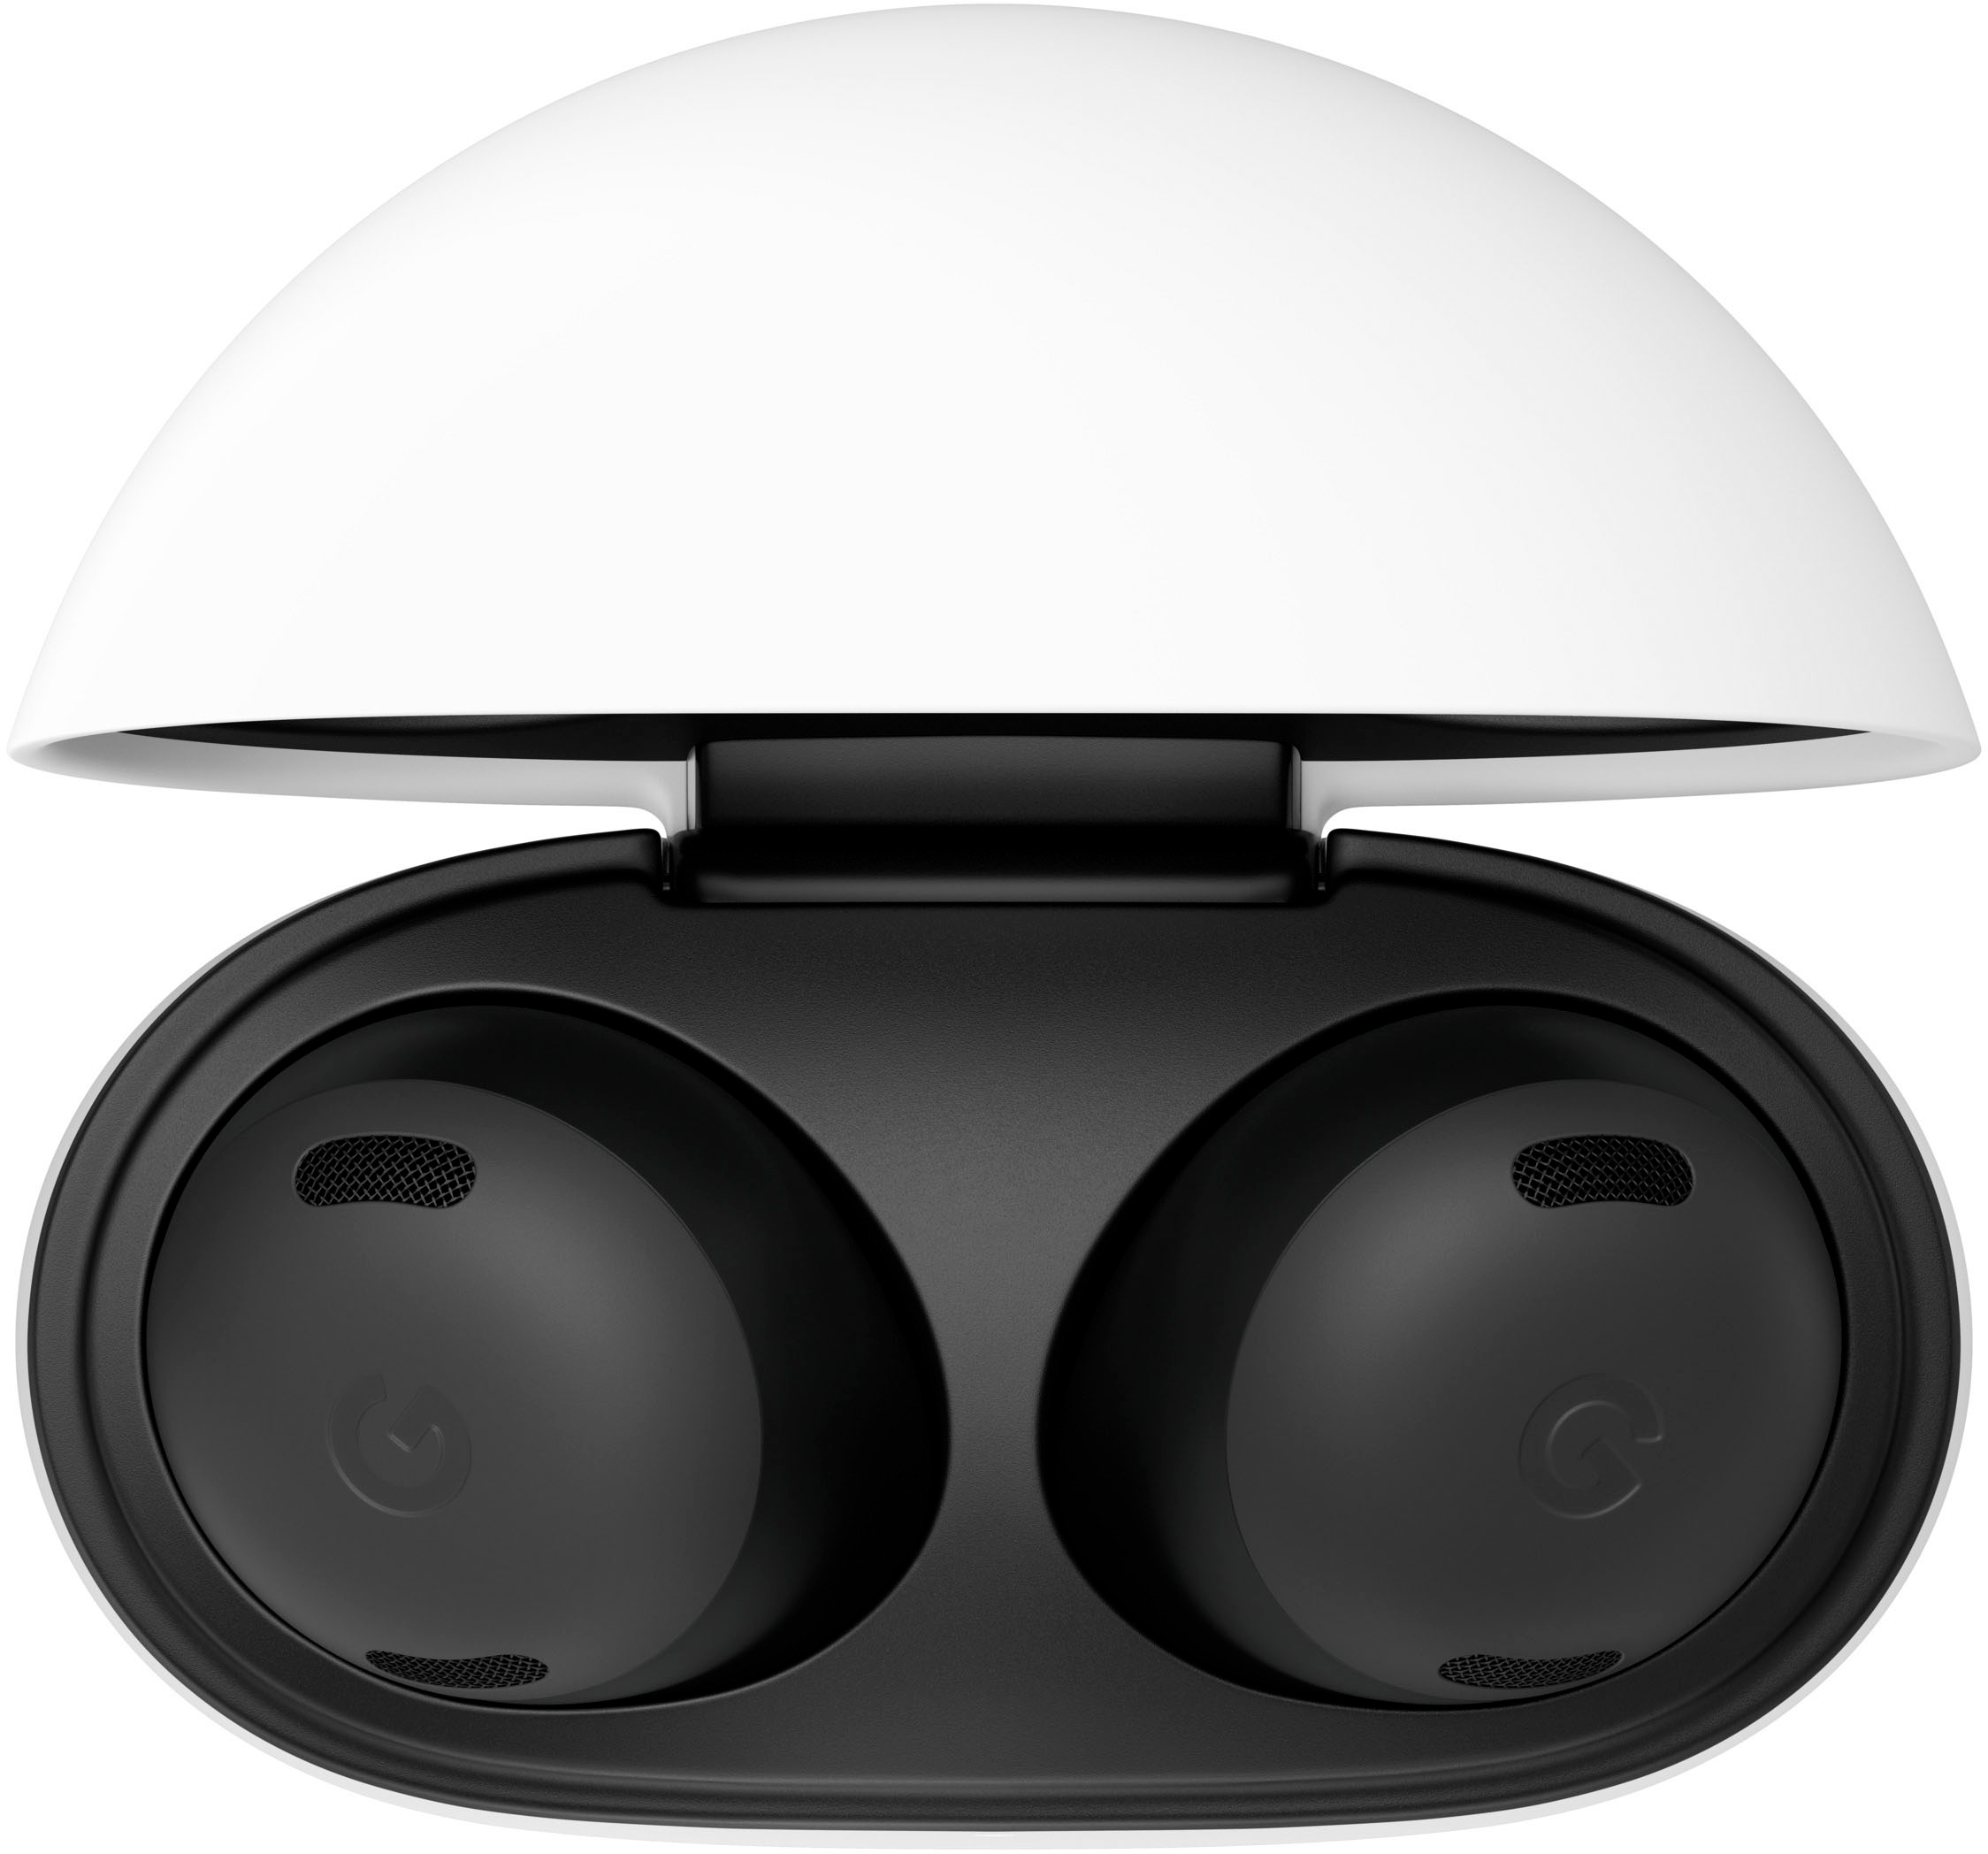 Has the Google Pixel Buds Pro for 40% Off